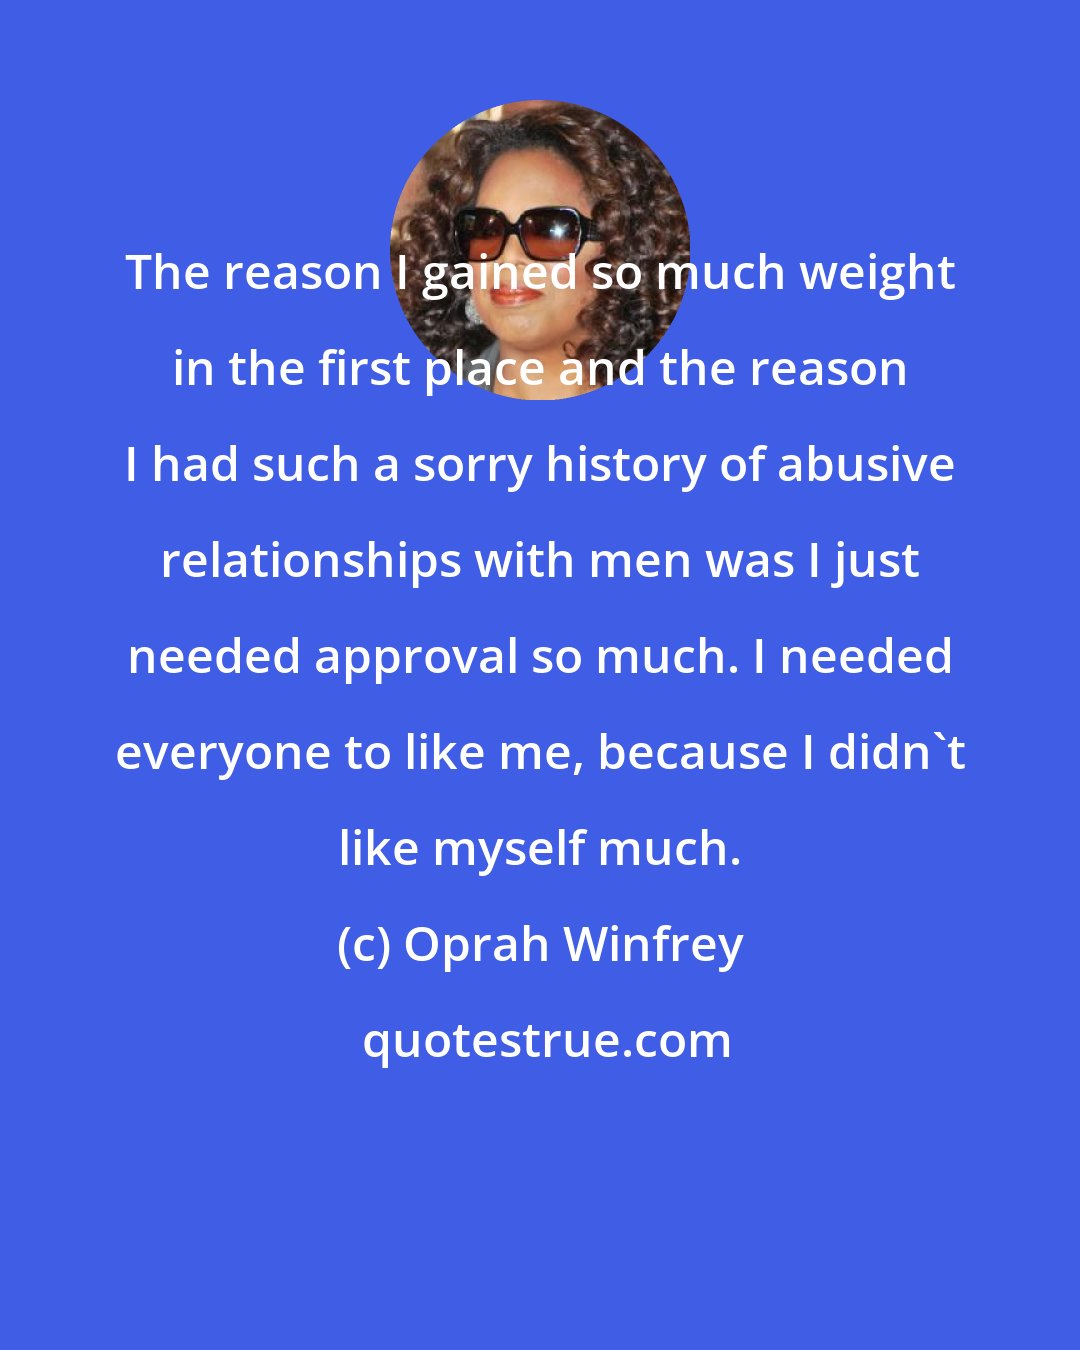 Oprah Winfrey: The reason I gained so much weight in the first place and the reason I had such a sorry history of abusive relationships with men was I just needed approval so much. I needed everyone to like me, because I didn't like myself much.